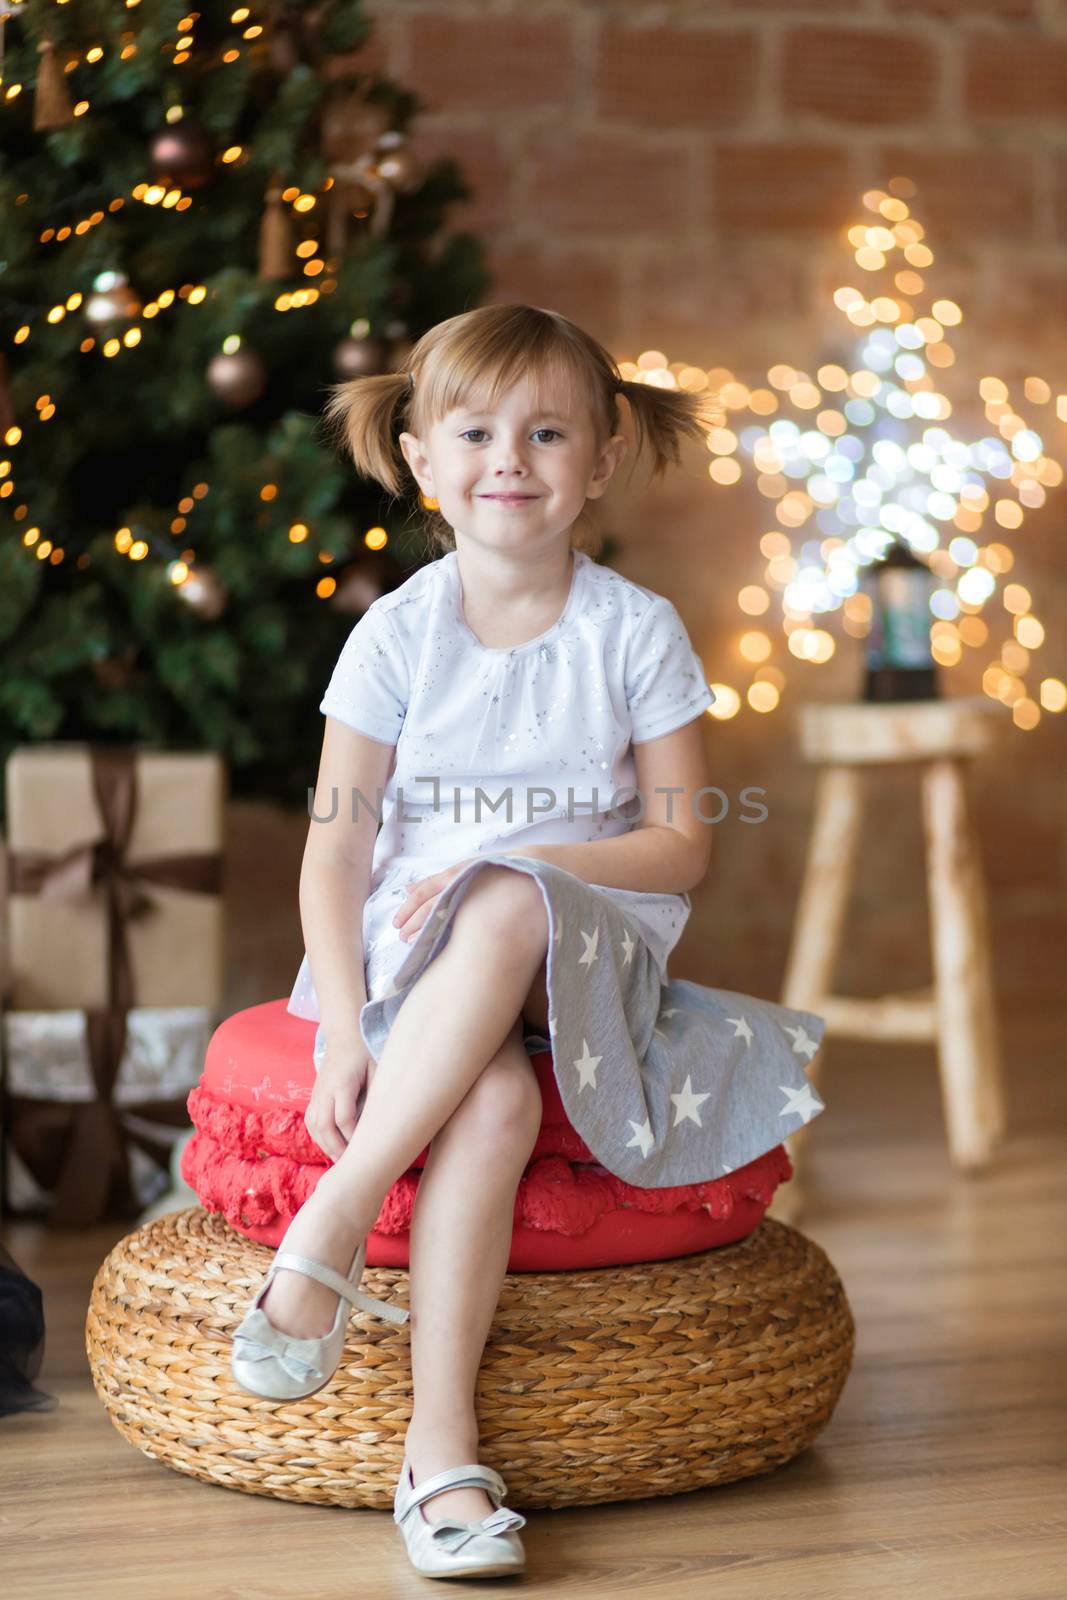 Pretty little child is sitting in front of christmas tree among garlands and presents..